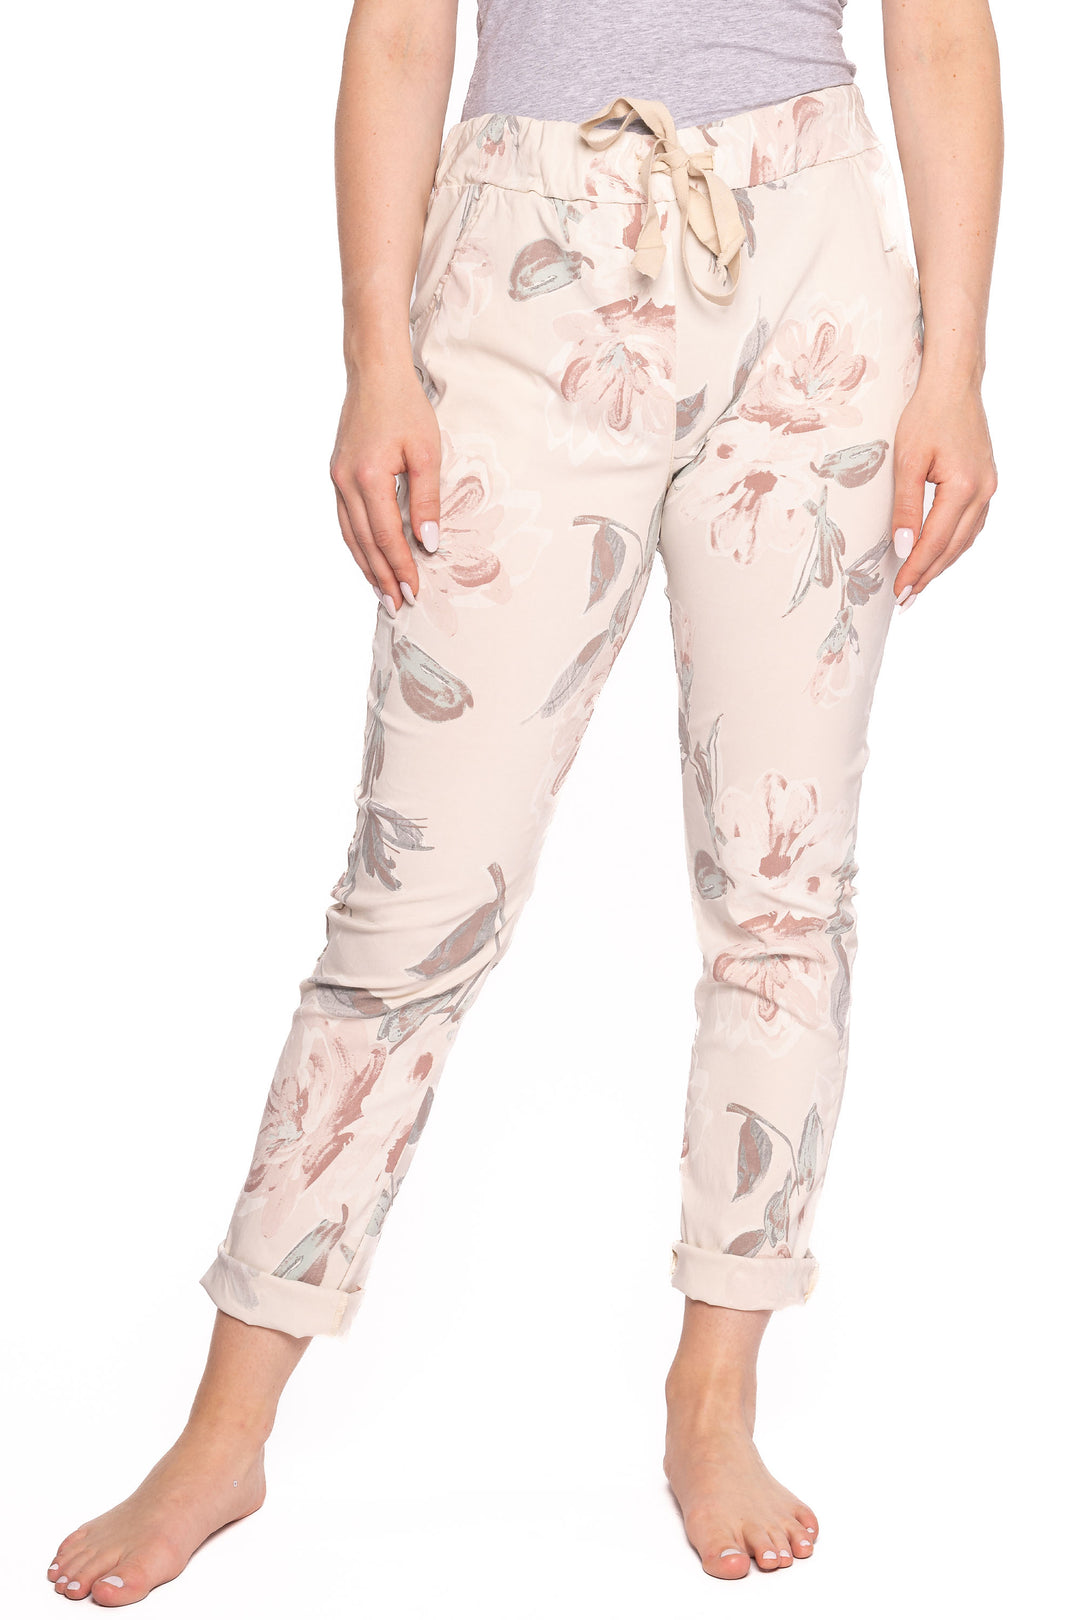 Etern Spring 2023 women's casual floral print jogger pant - sand front